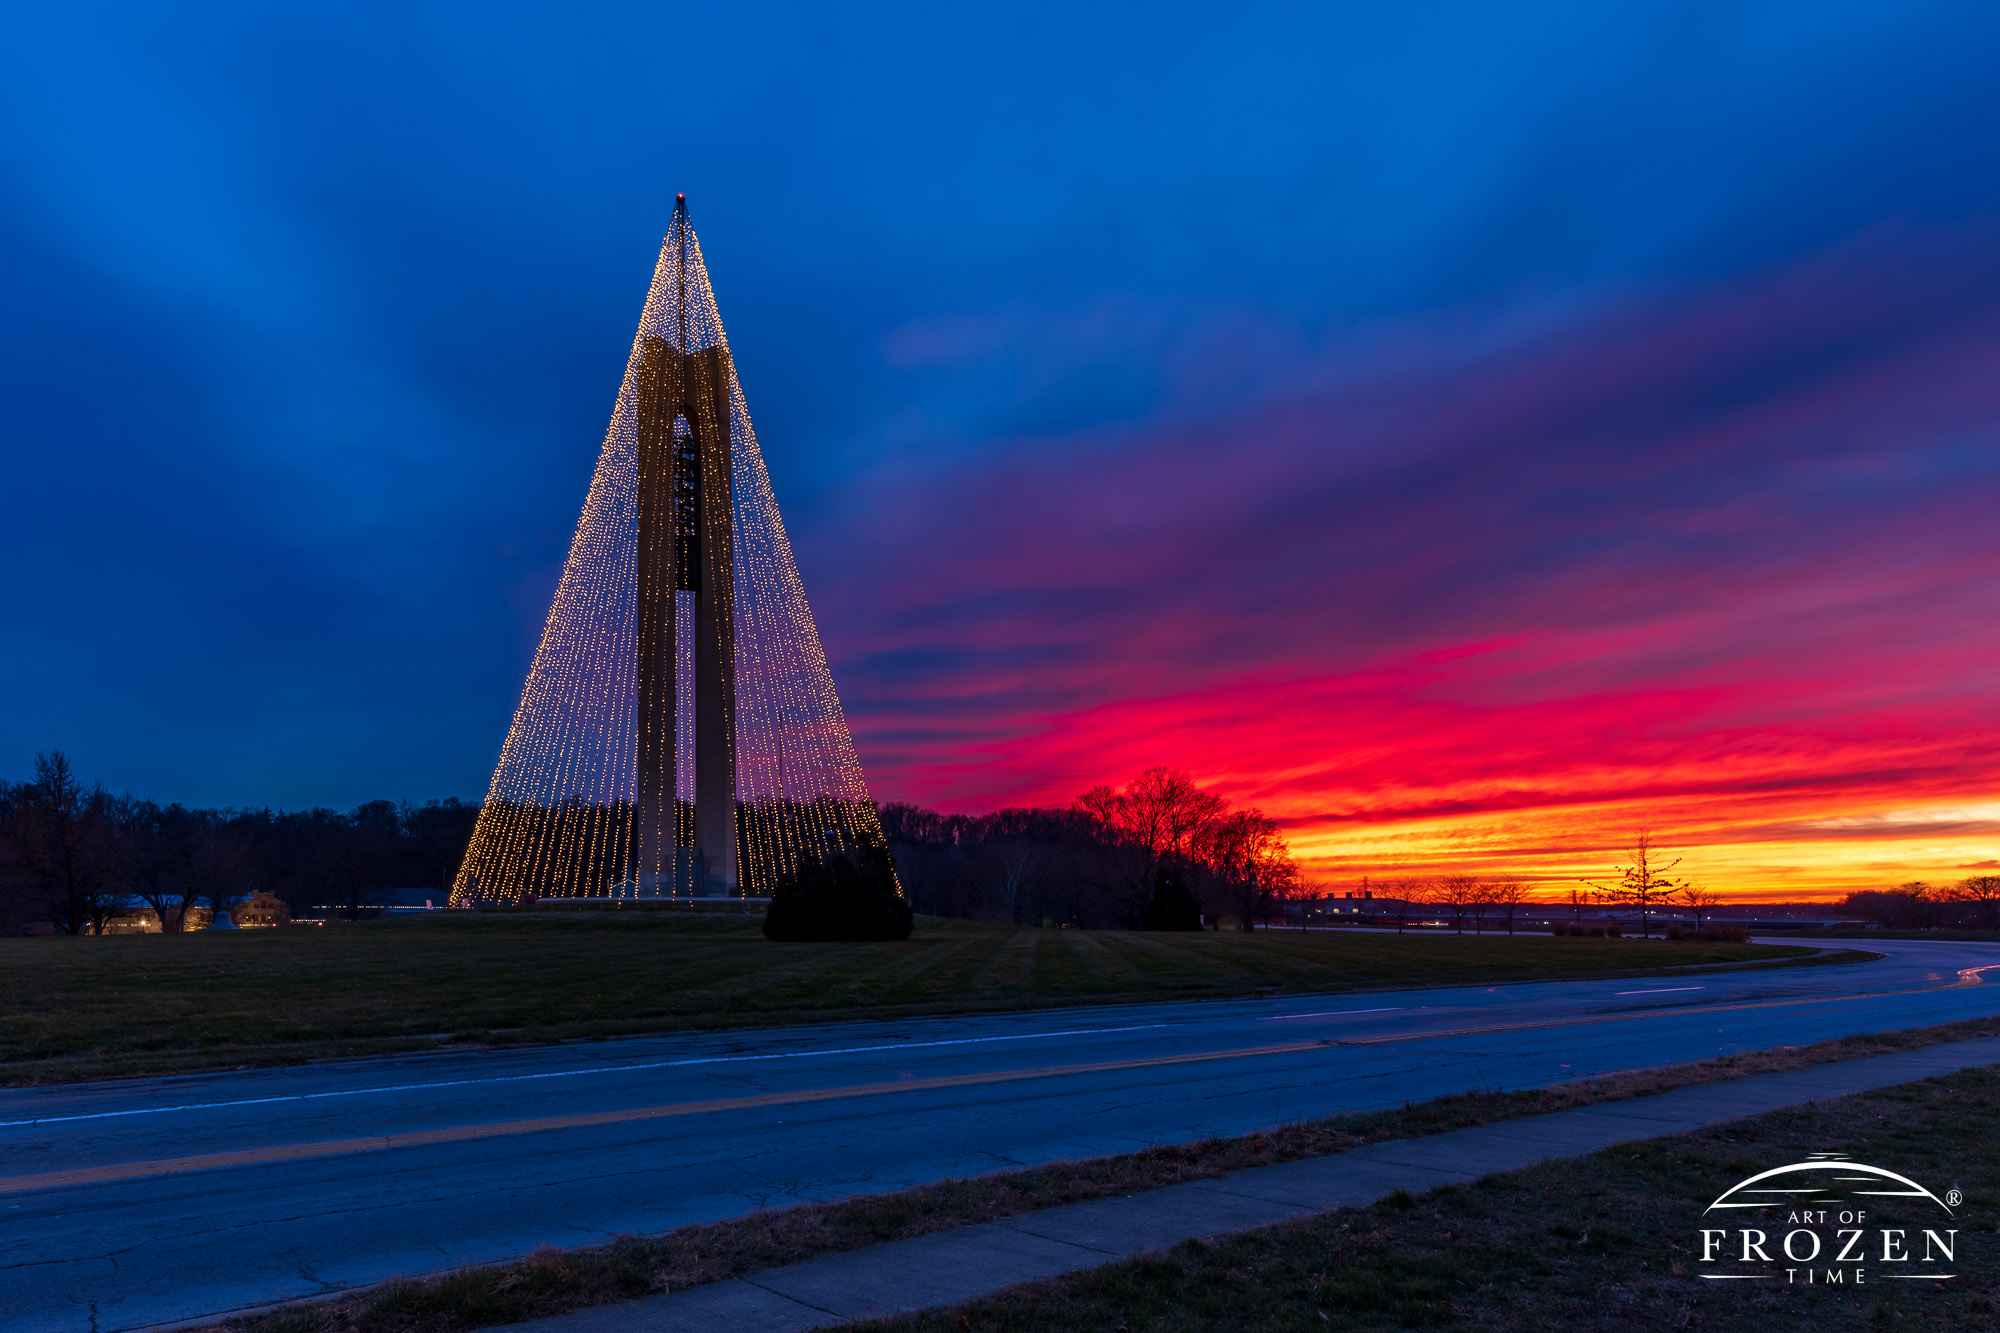 Dayton's Belltower adorned with Christmas lights during a fiery sunset